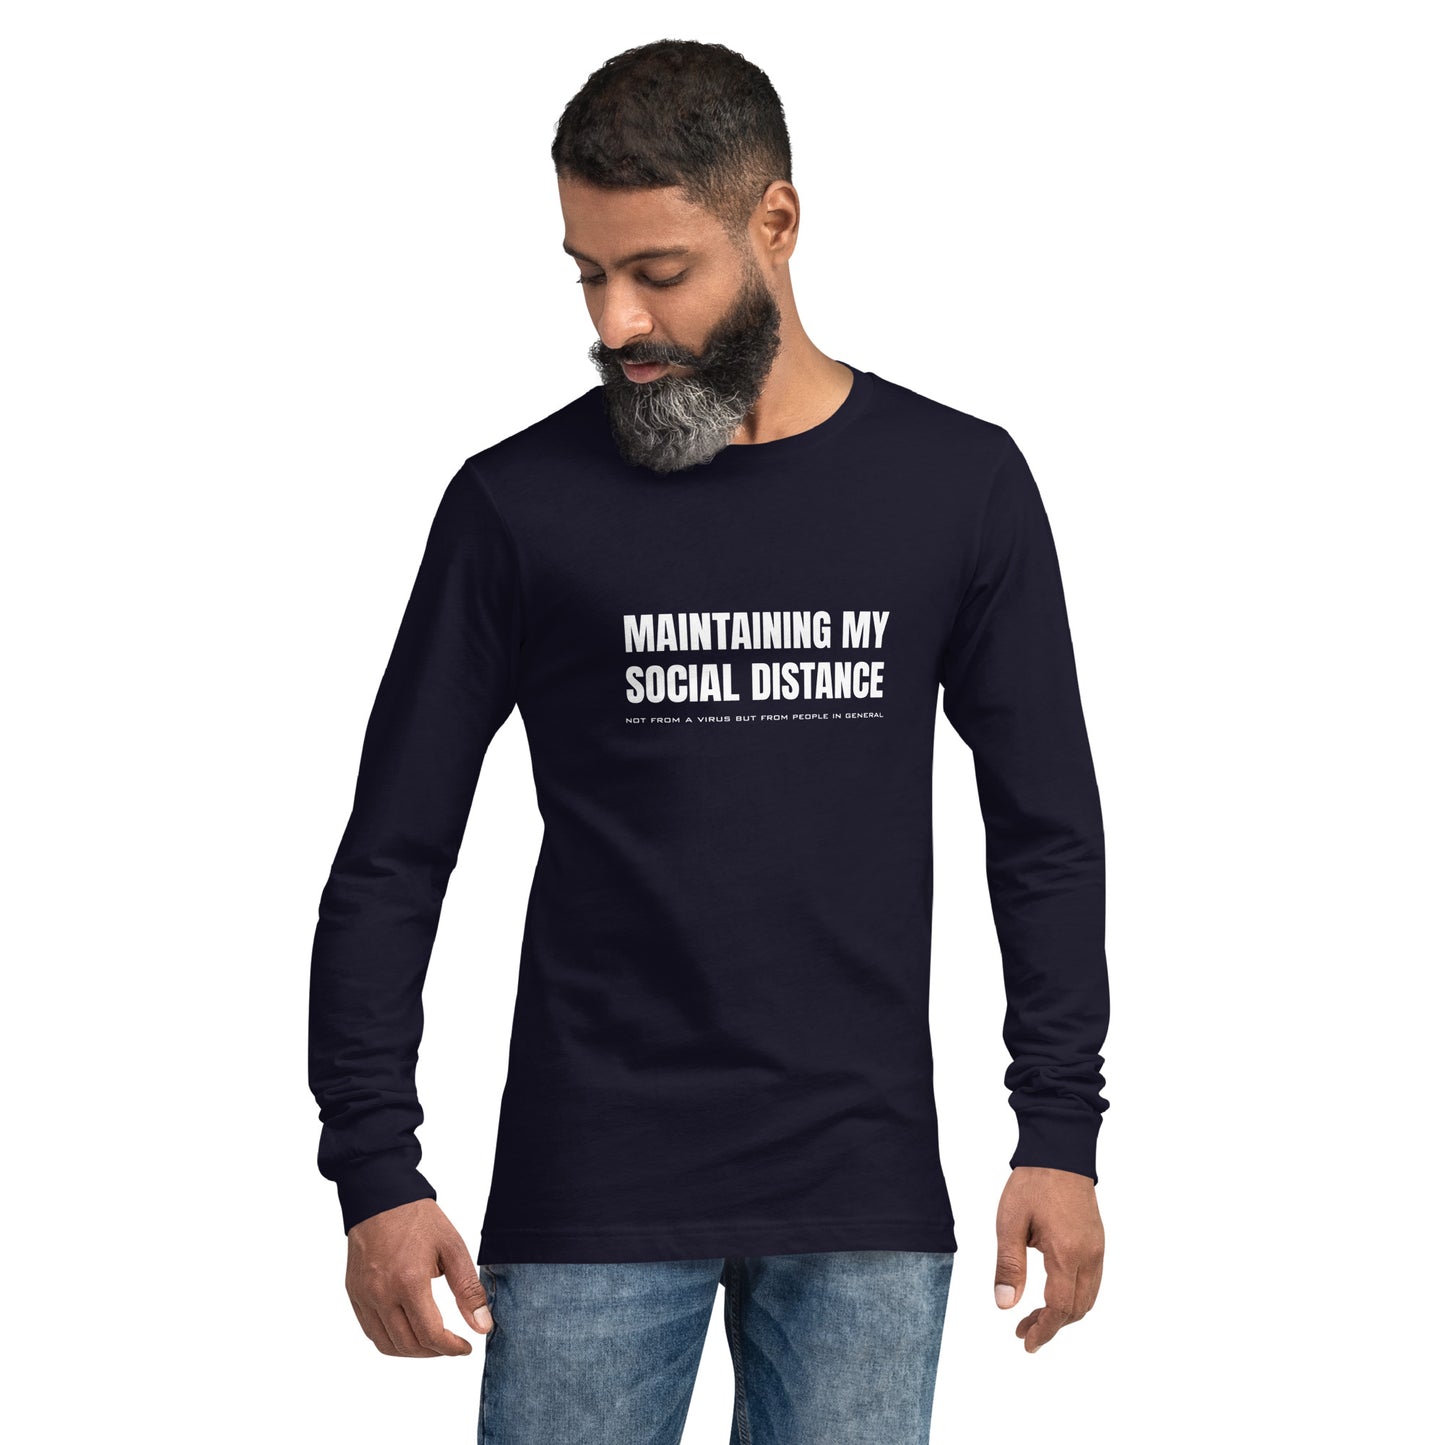 Model wearing a navy long sleeve t-shirt with white graphic: "MAINTAINING MY SOCIAL DISTANCE not from a virus but from people in general"